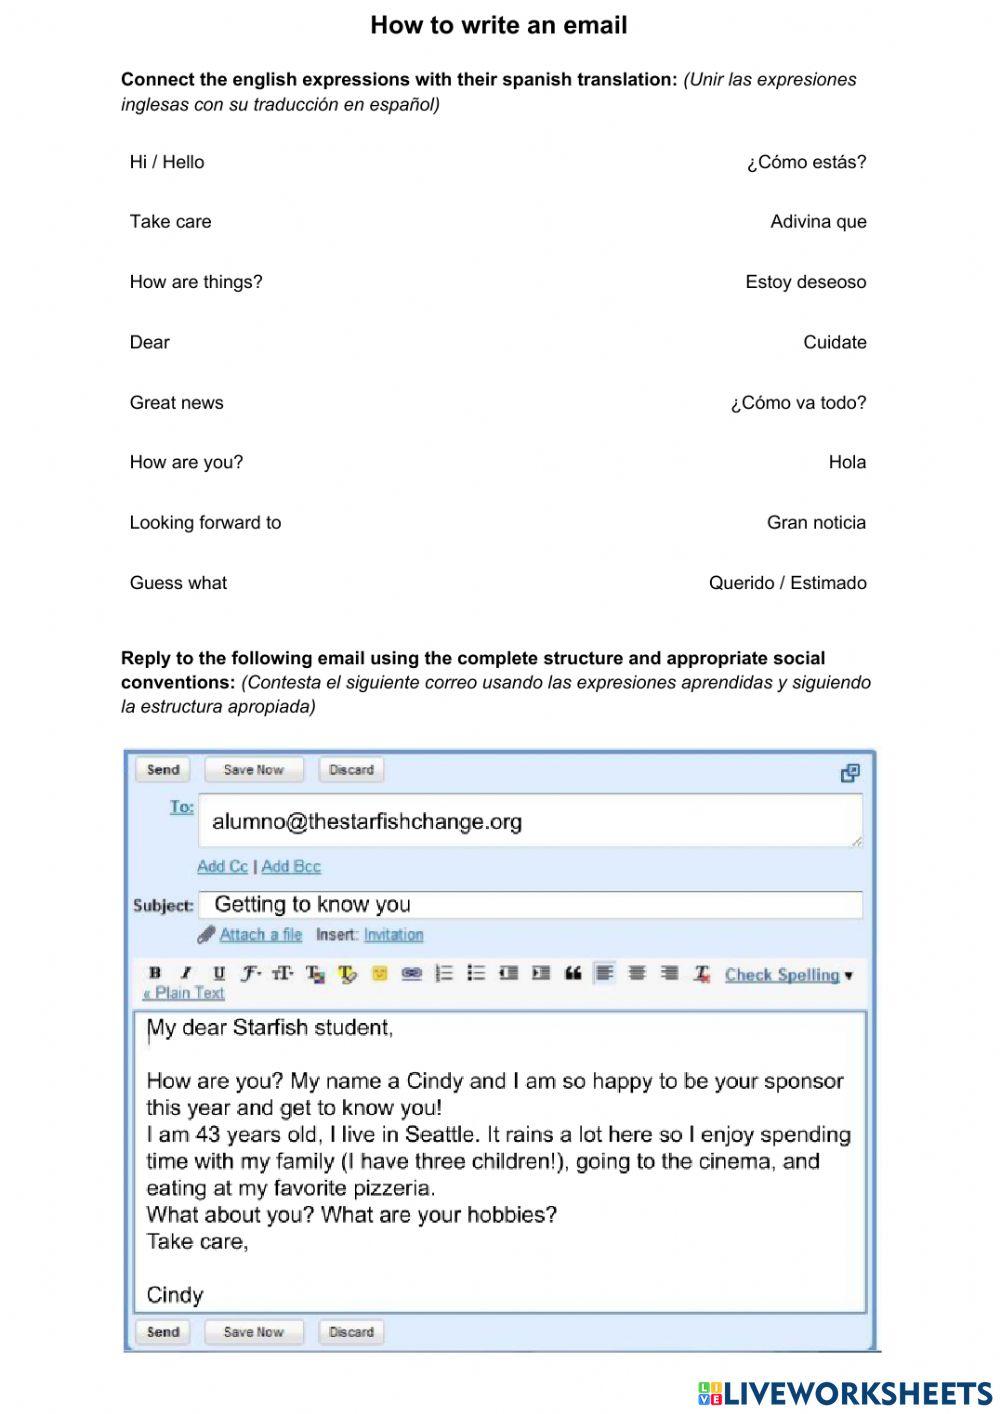 Email Writing Exercise